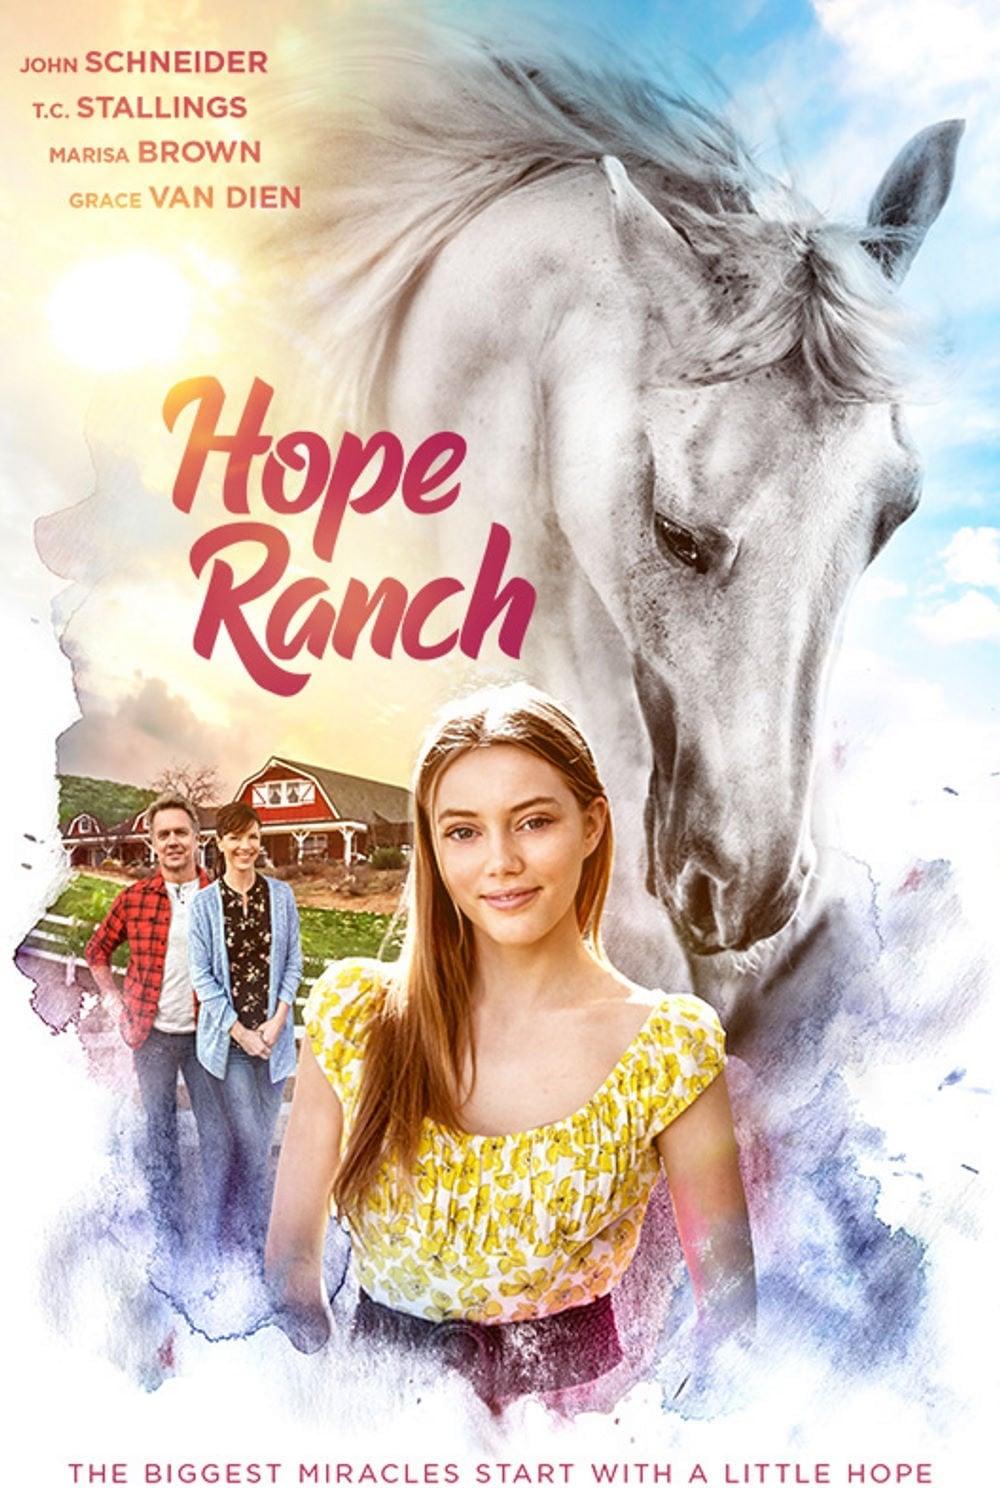 Hope Ranch poster